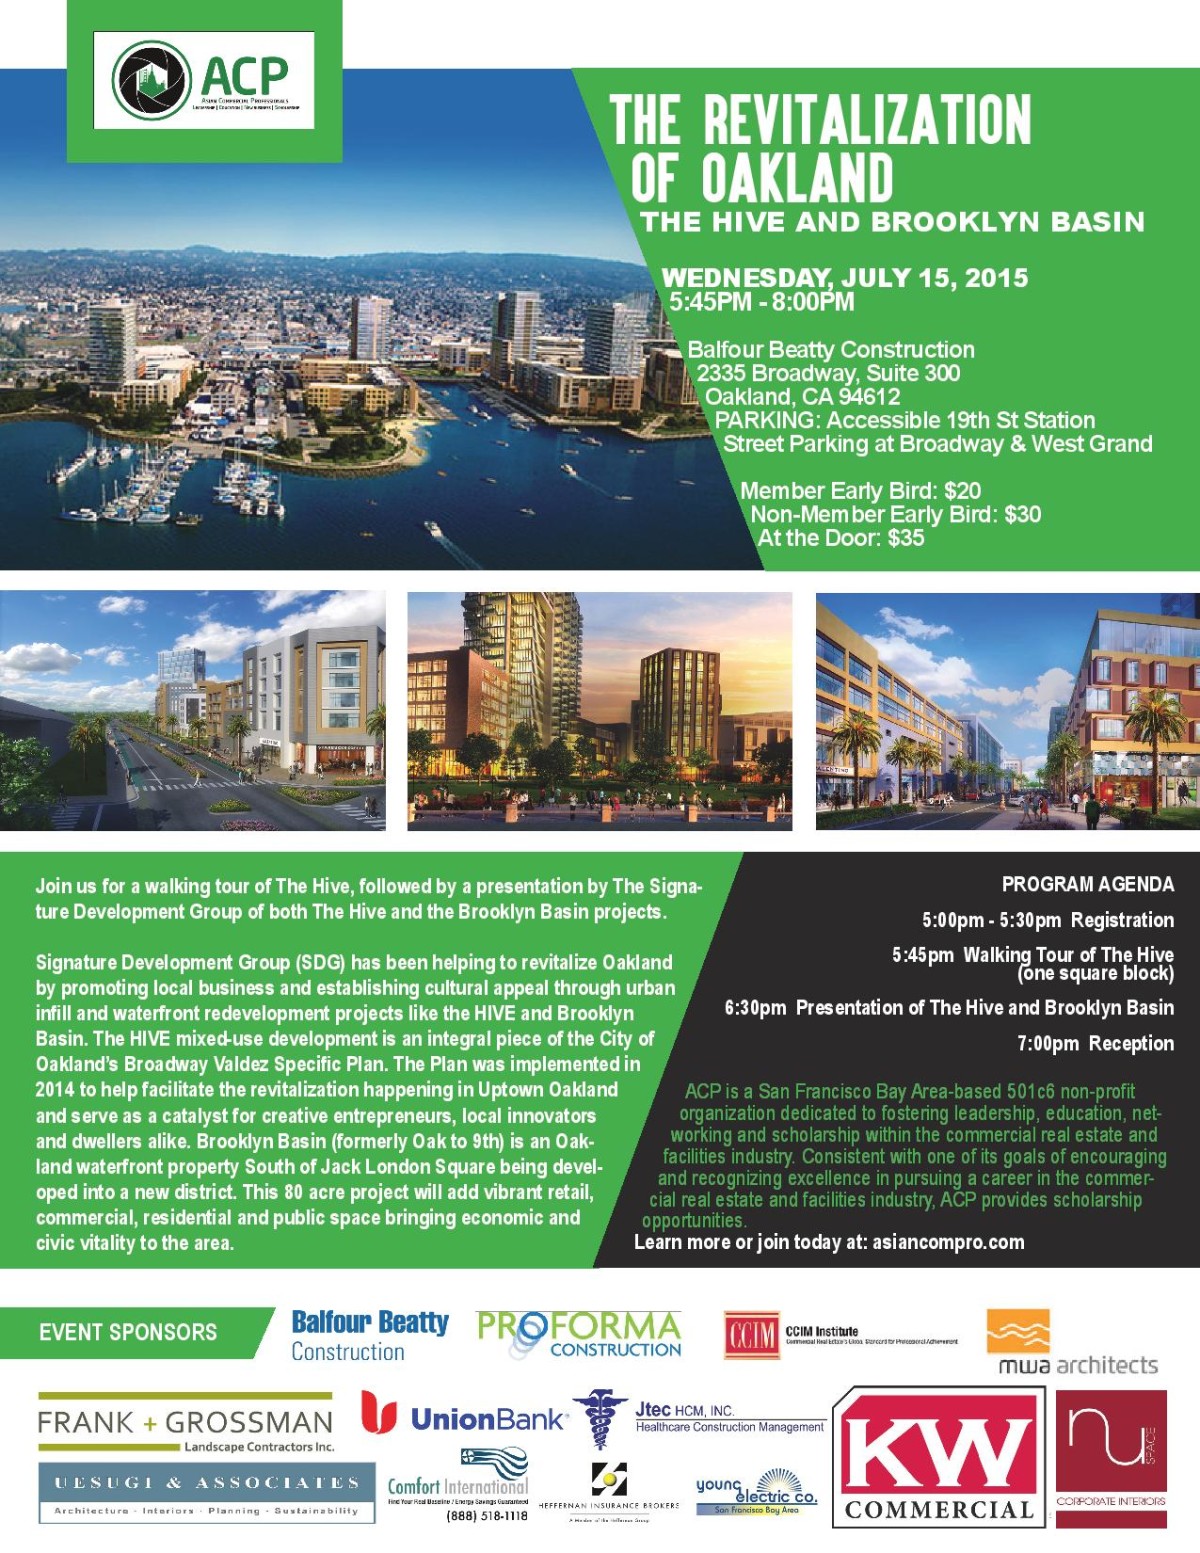 The Revitalization of Oakland: July 15th